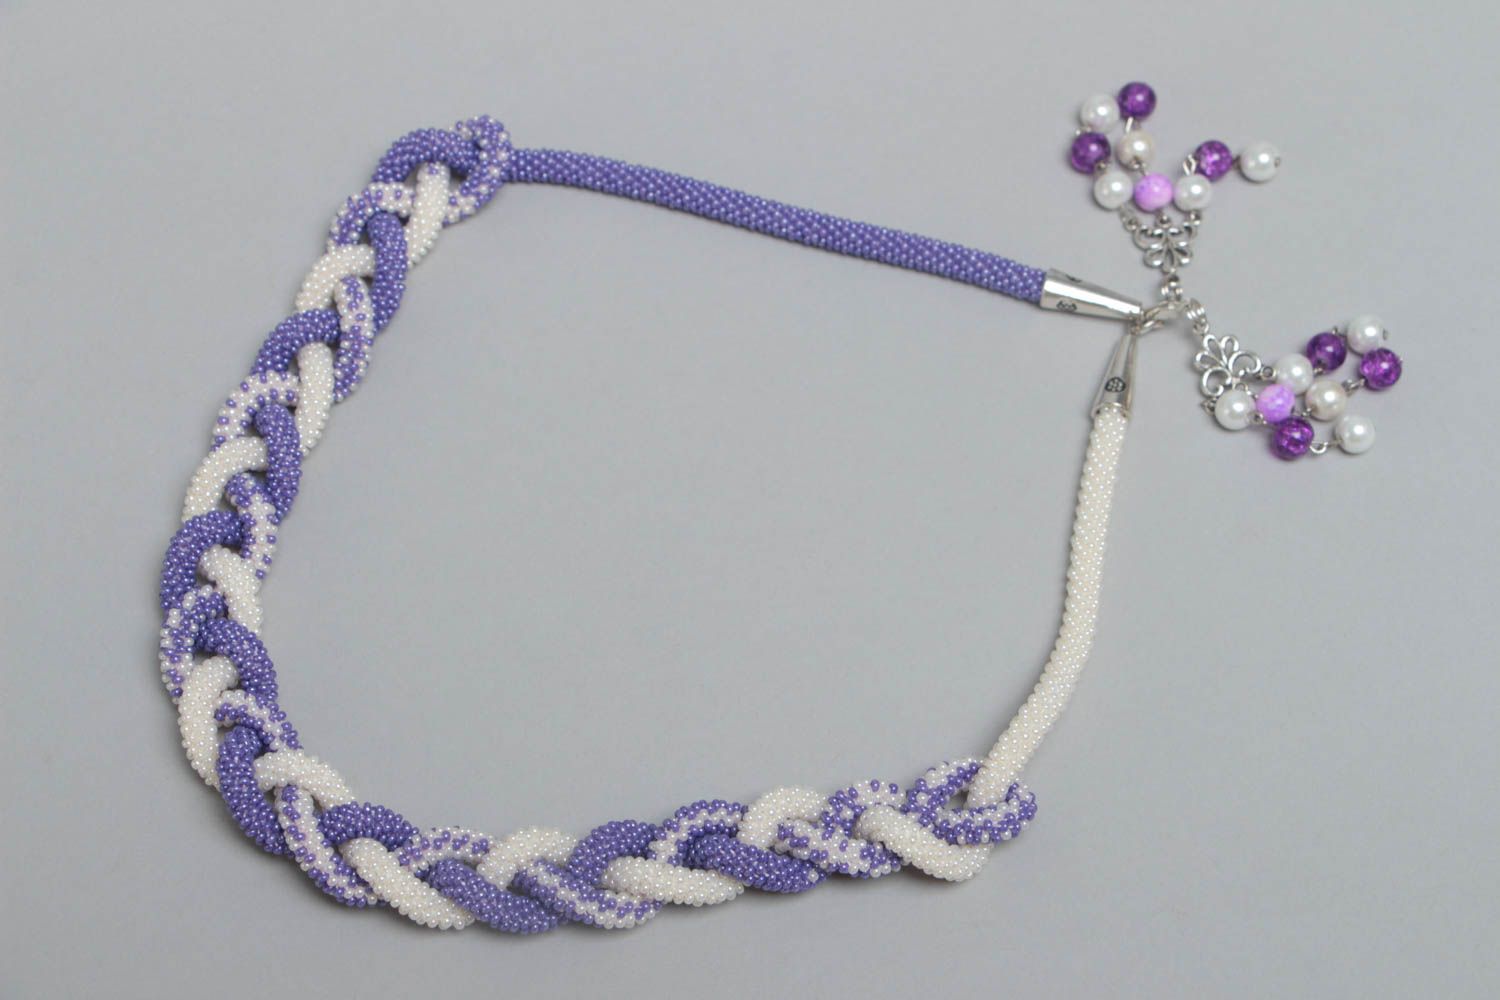 Lilac and white handmade braided beaded lariat necklace designer jewelry photo 2